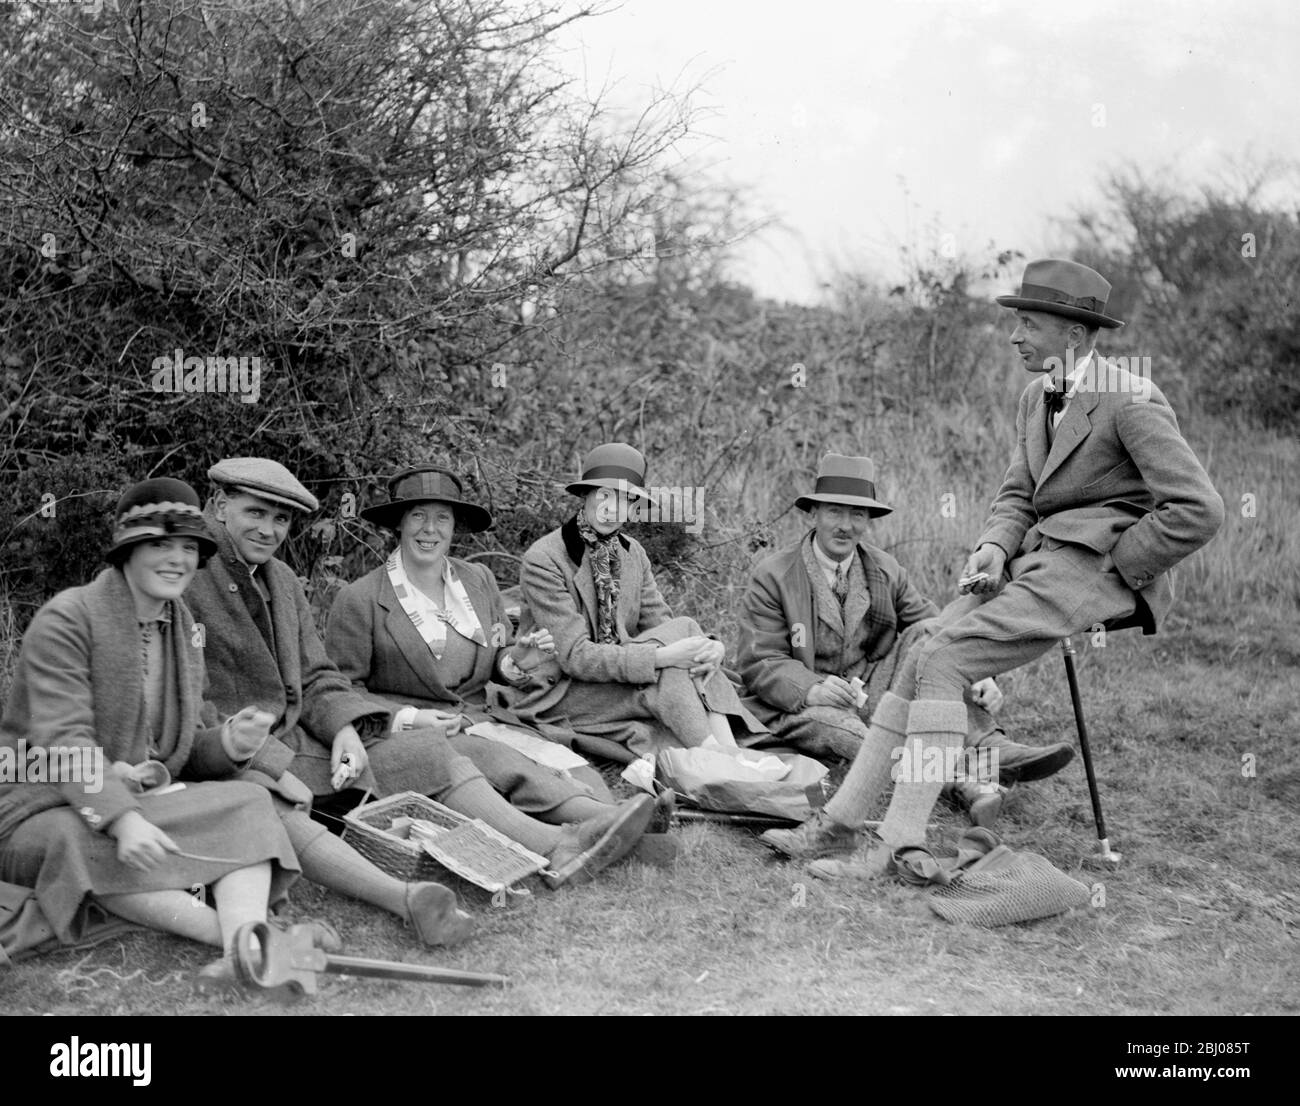 Avon Valley Coursing meet at Downton, Hampshire. Miss, Mr and Mrs Yeatman-Biggs, Mrs Newall, General Seagram and Mr Newell. - 5 November 1924 Stock Photo